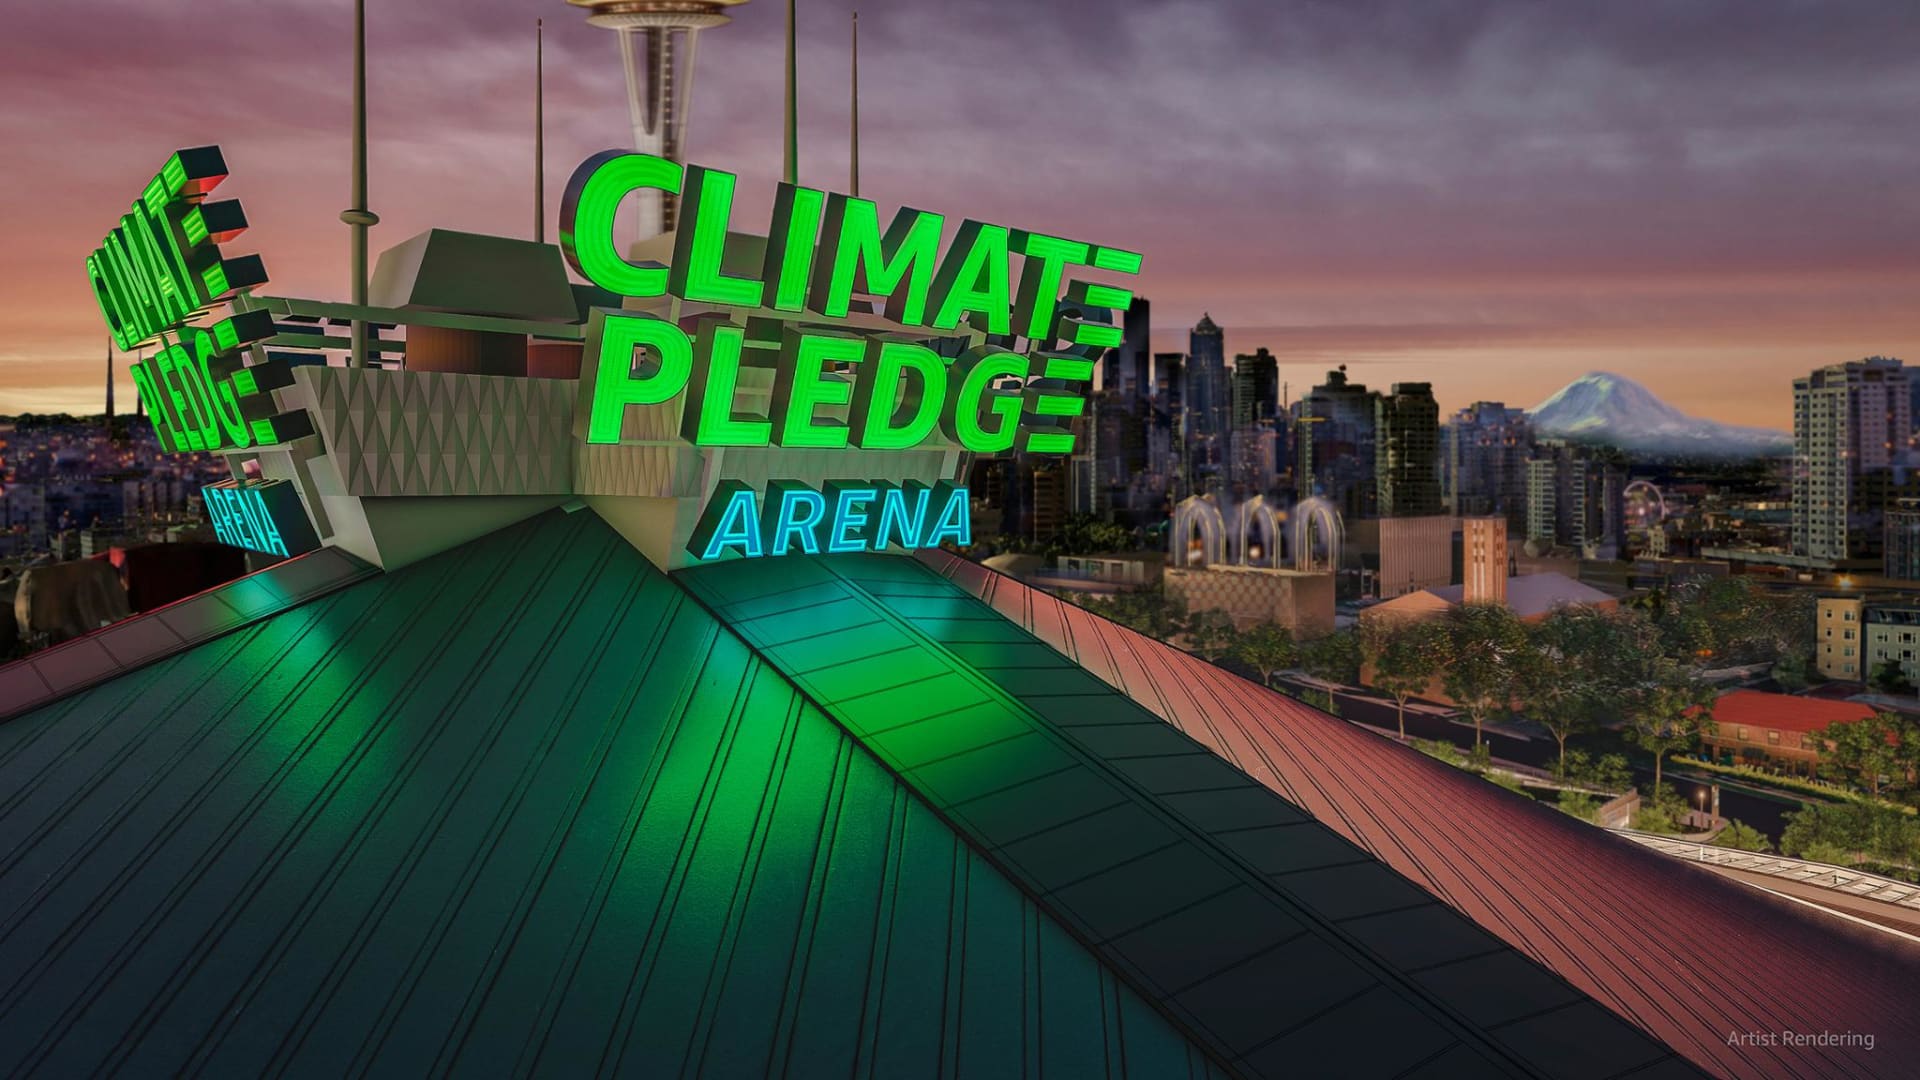 Amazon bought the naming rights to rename Key Arena to Climate Change Arena.